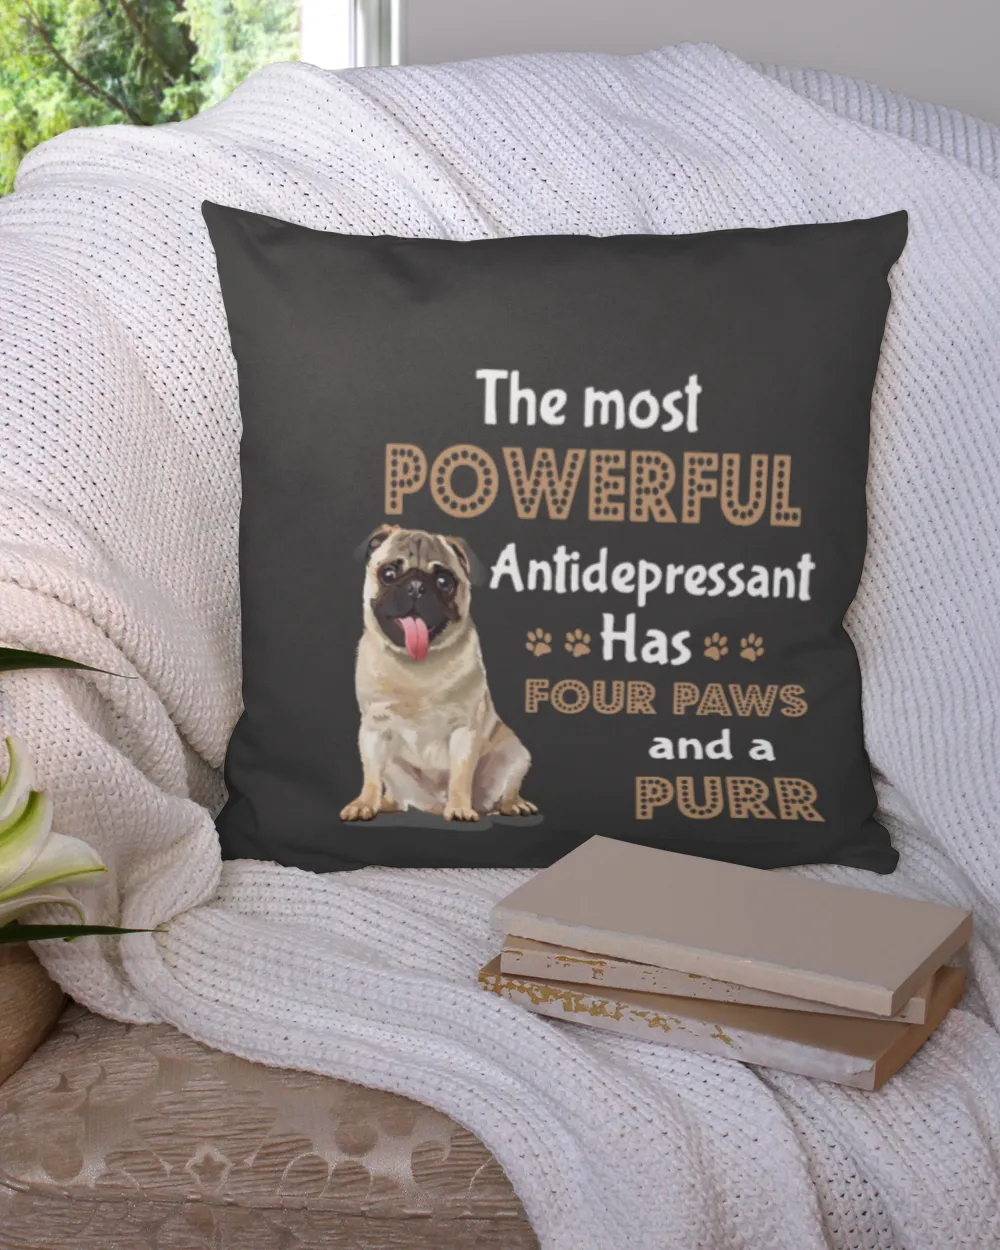 The Most Powerful Antidepressant Has Four Paws And